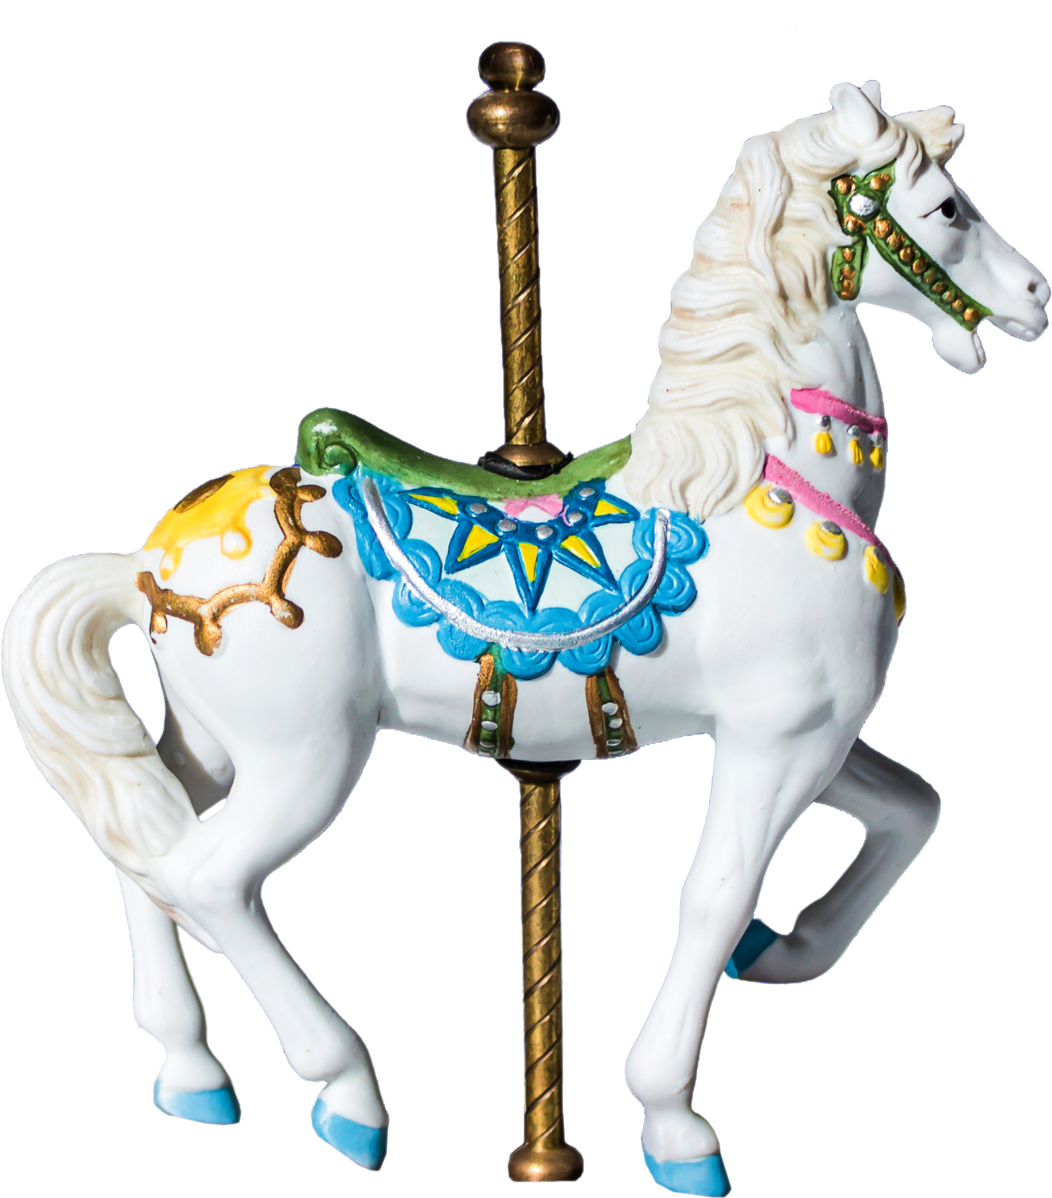 A White Horse With A Colorful Design